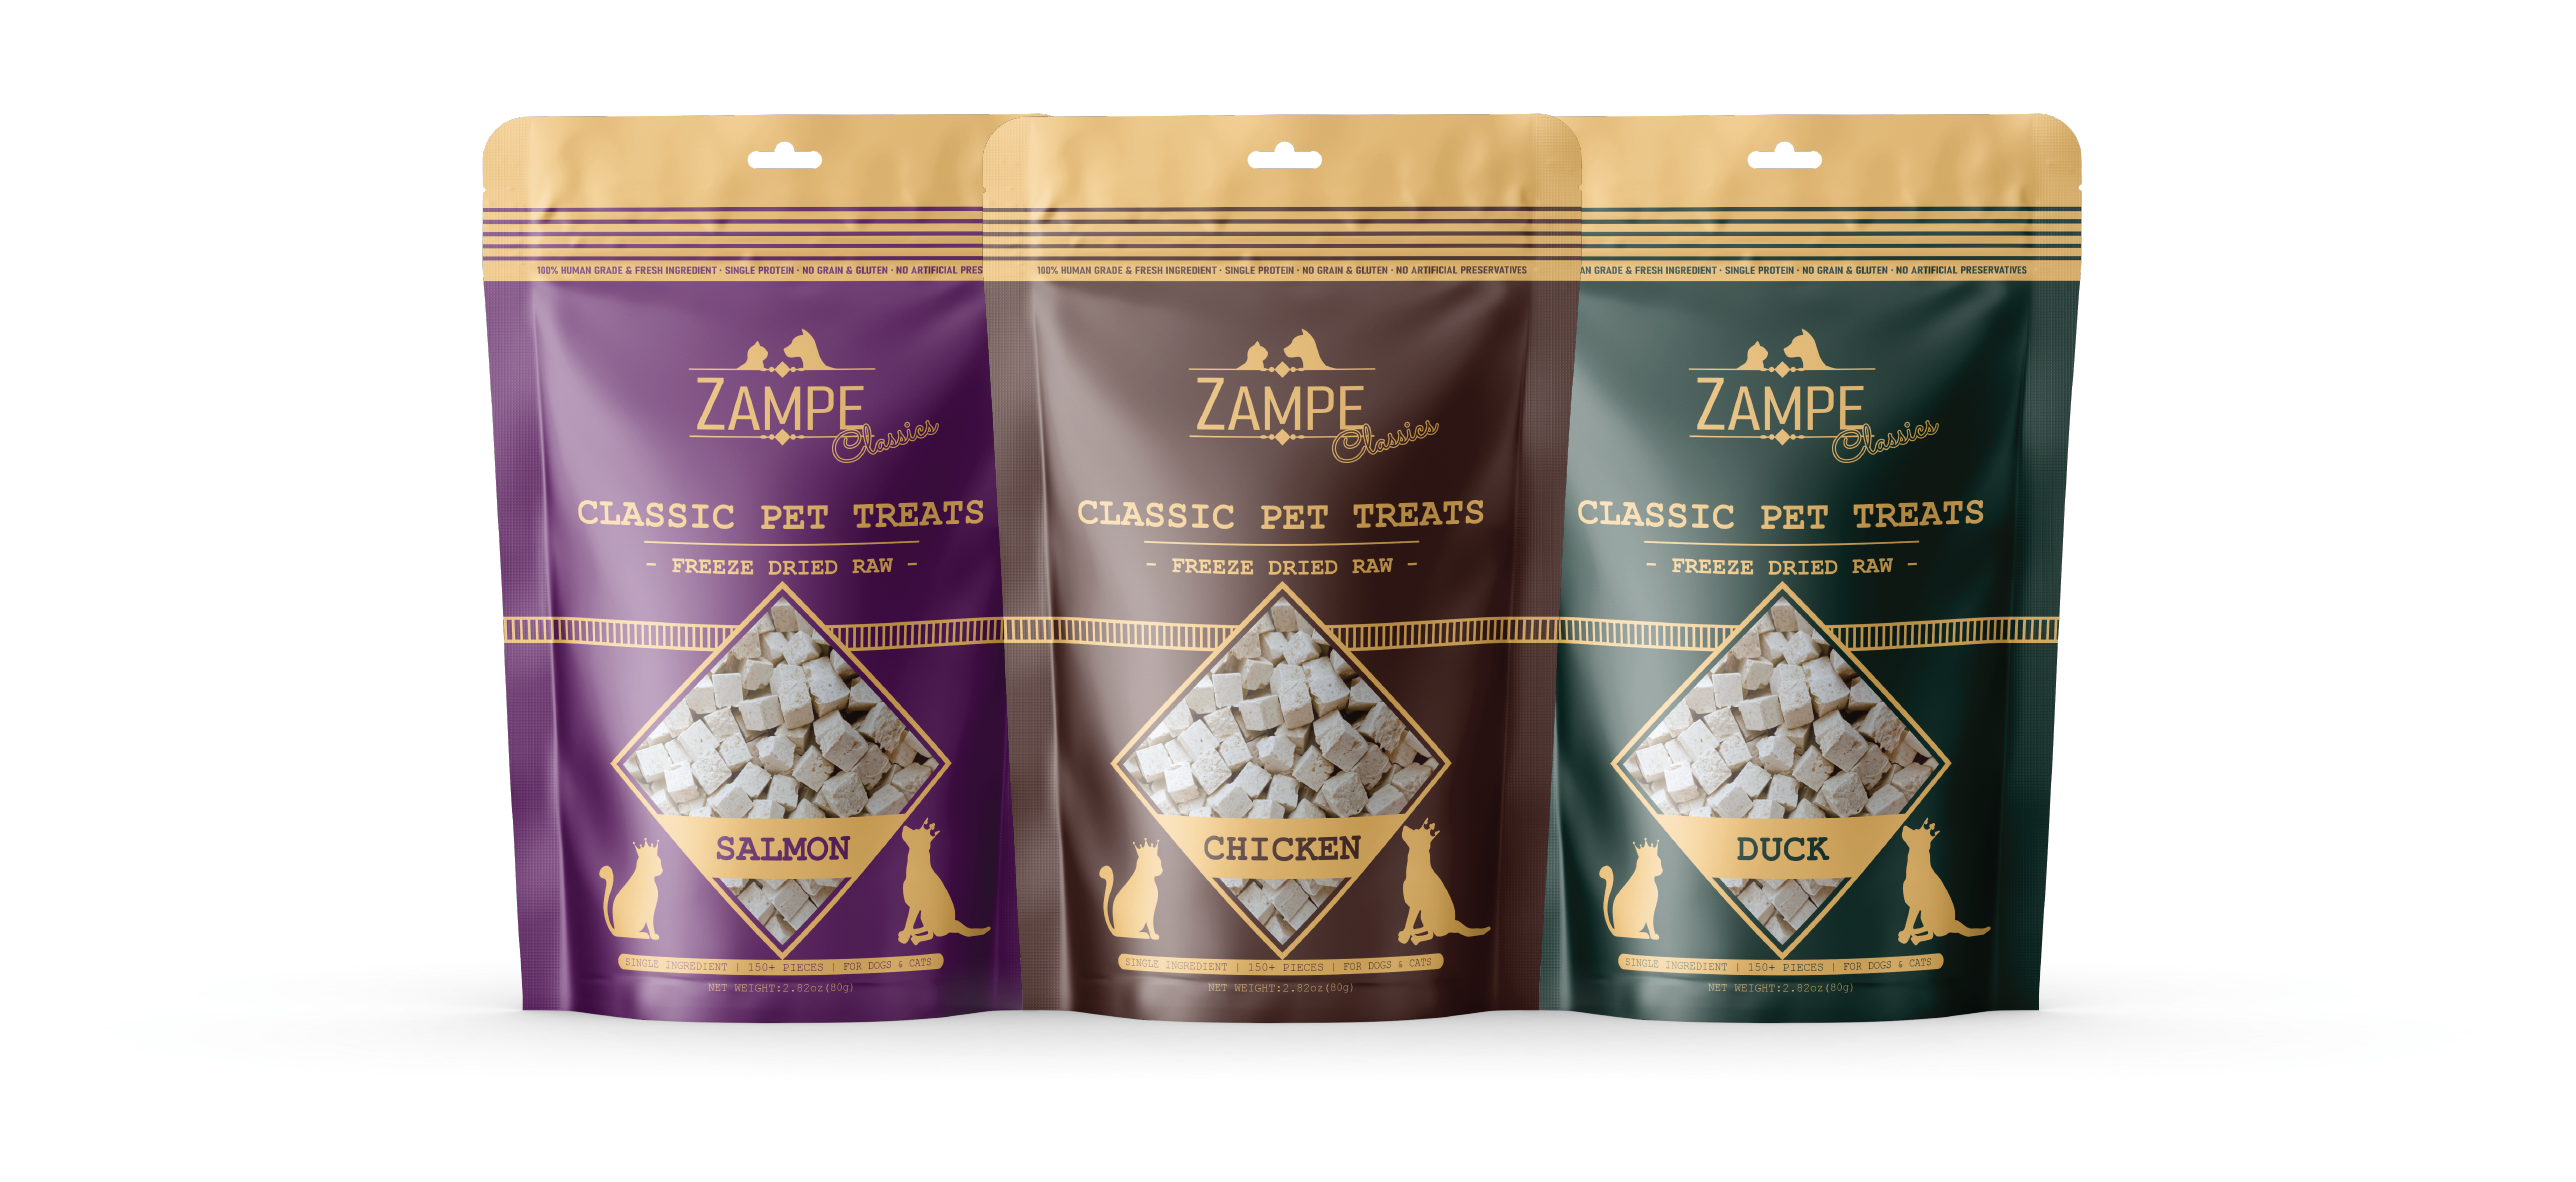 Zampe Freeze Dried Single Ingredient Meat Treats for Dogs and Cats